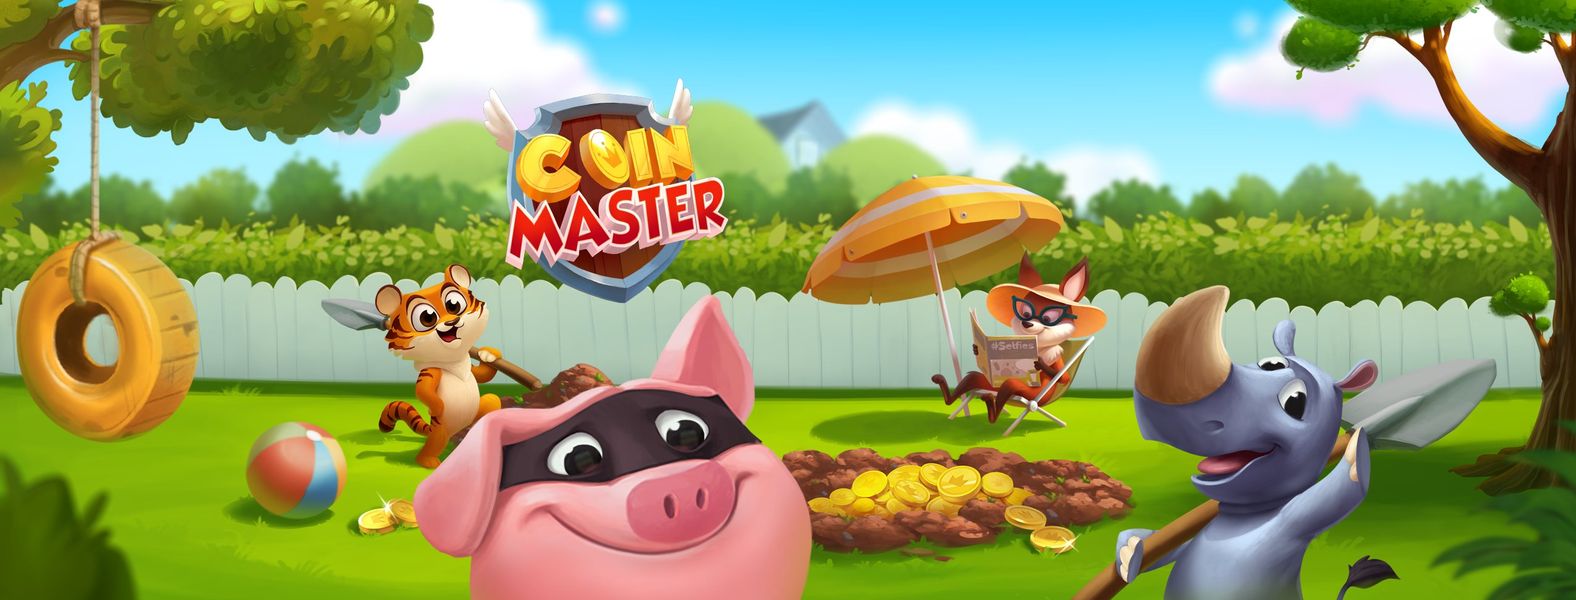 Coin Master Free Spins Today 23.04.2022, How to Get Coin Master Free Spins